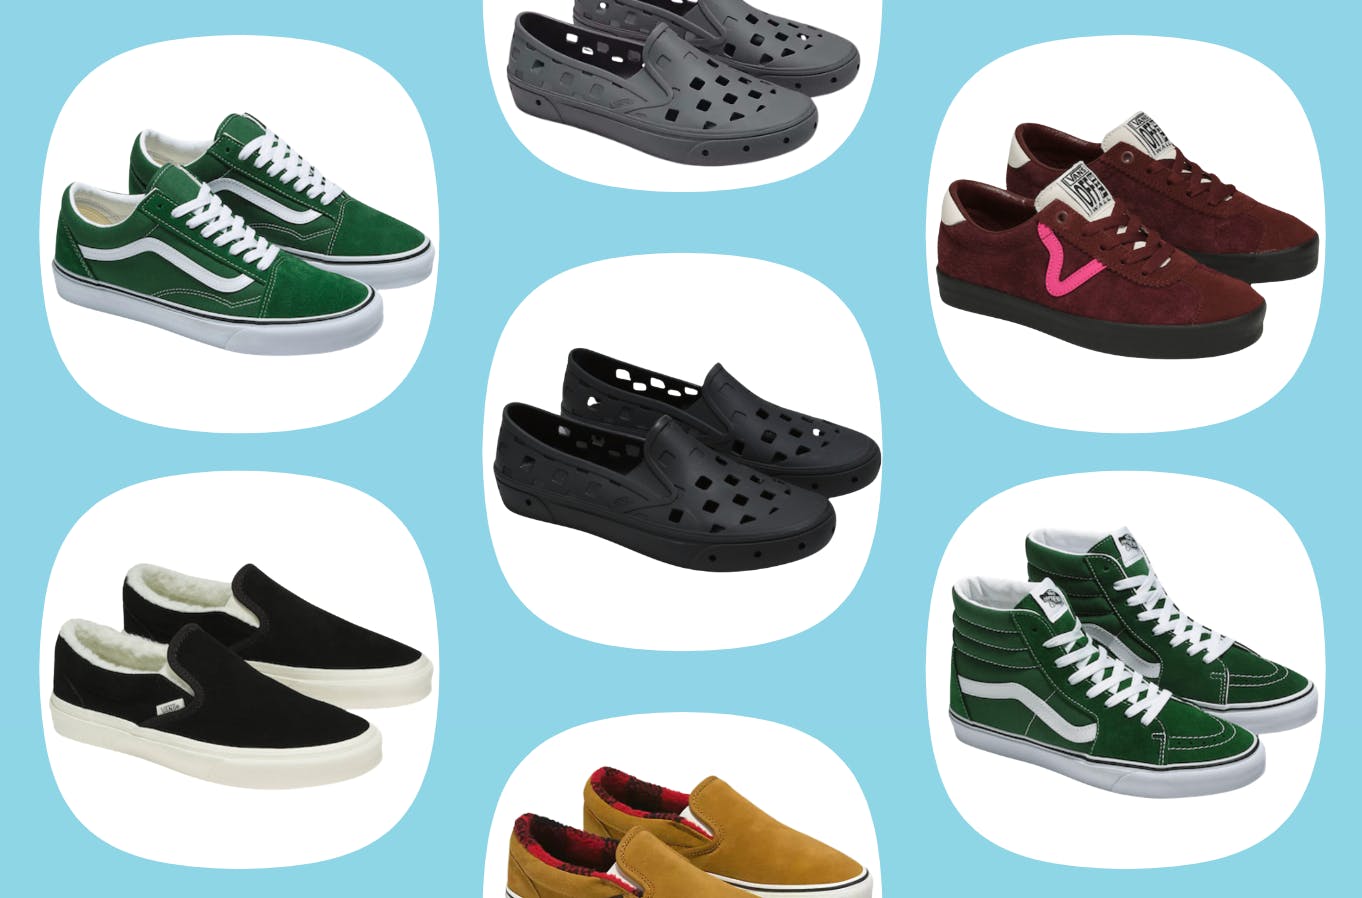 Vans Adult Shoes, Starting at $18 Shipped - The Krazy Coupon Lady